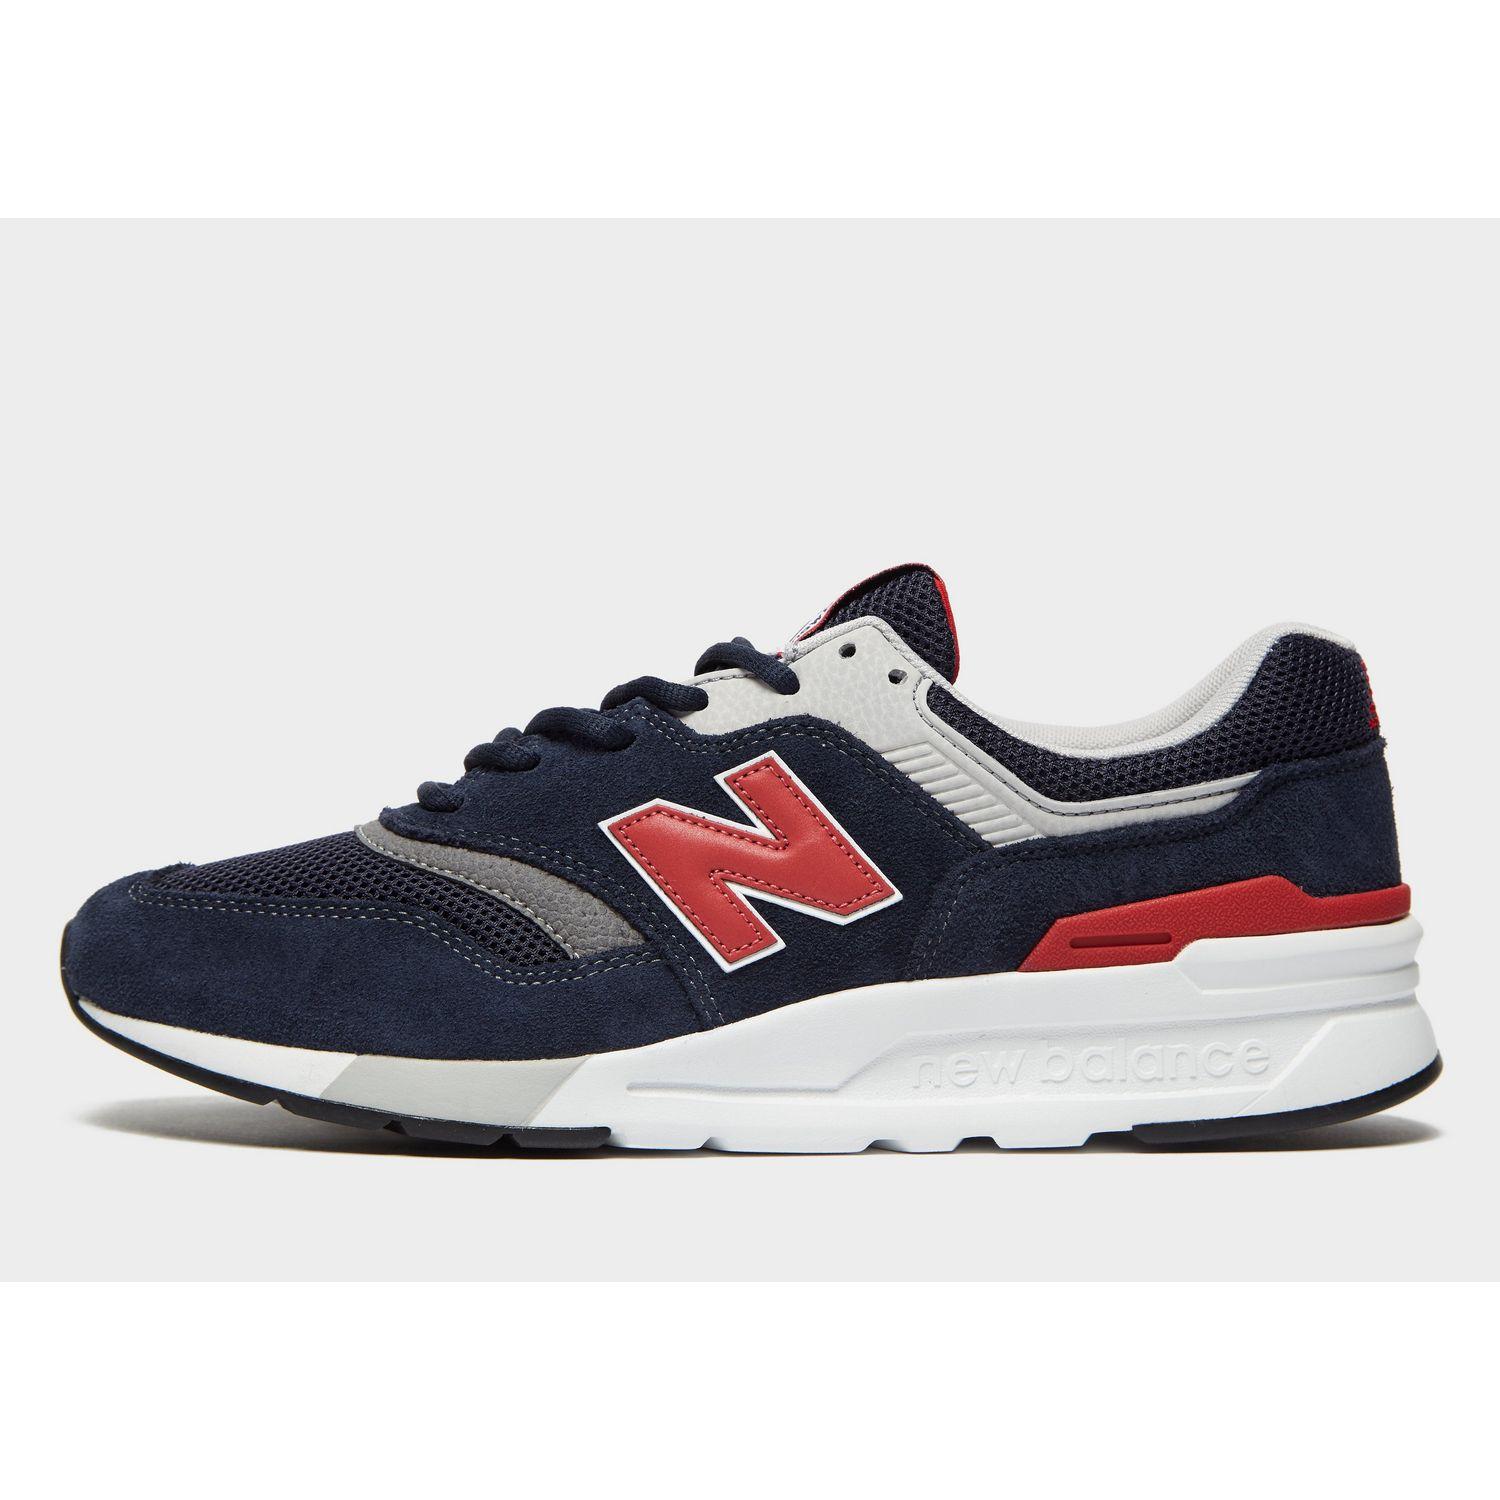 New Balance Leather 997h in Navy/Red/Grey (Blue) for Men - Lyst